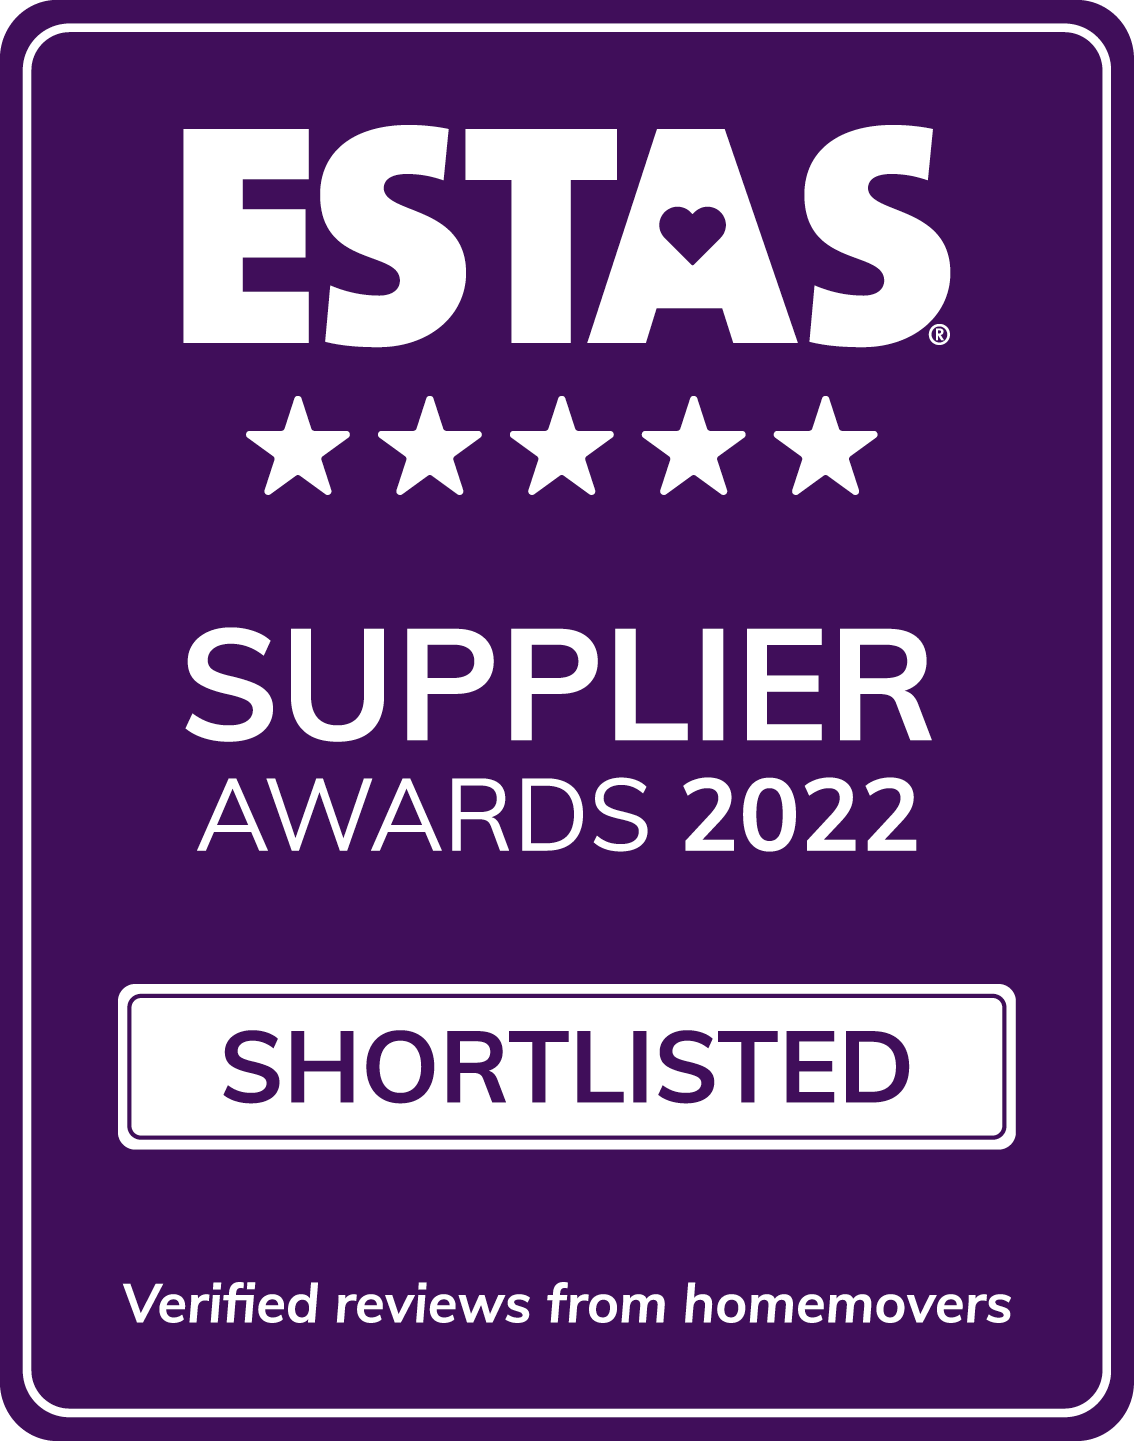 Inventory Base is shortlisted by ESTAS as one of the top suppliers in the UK property industry